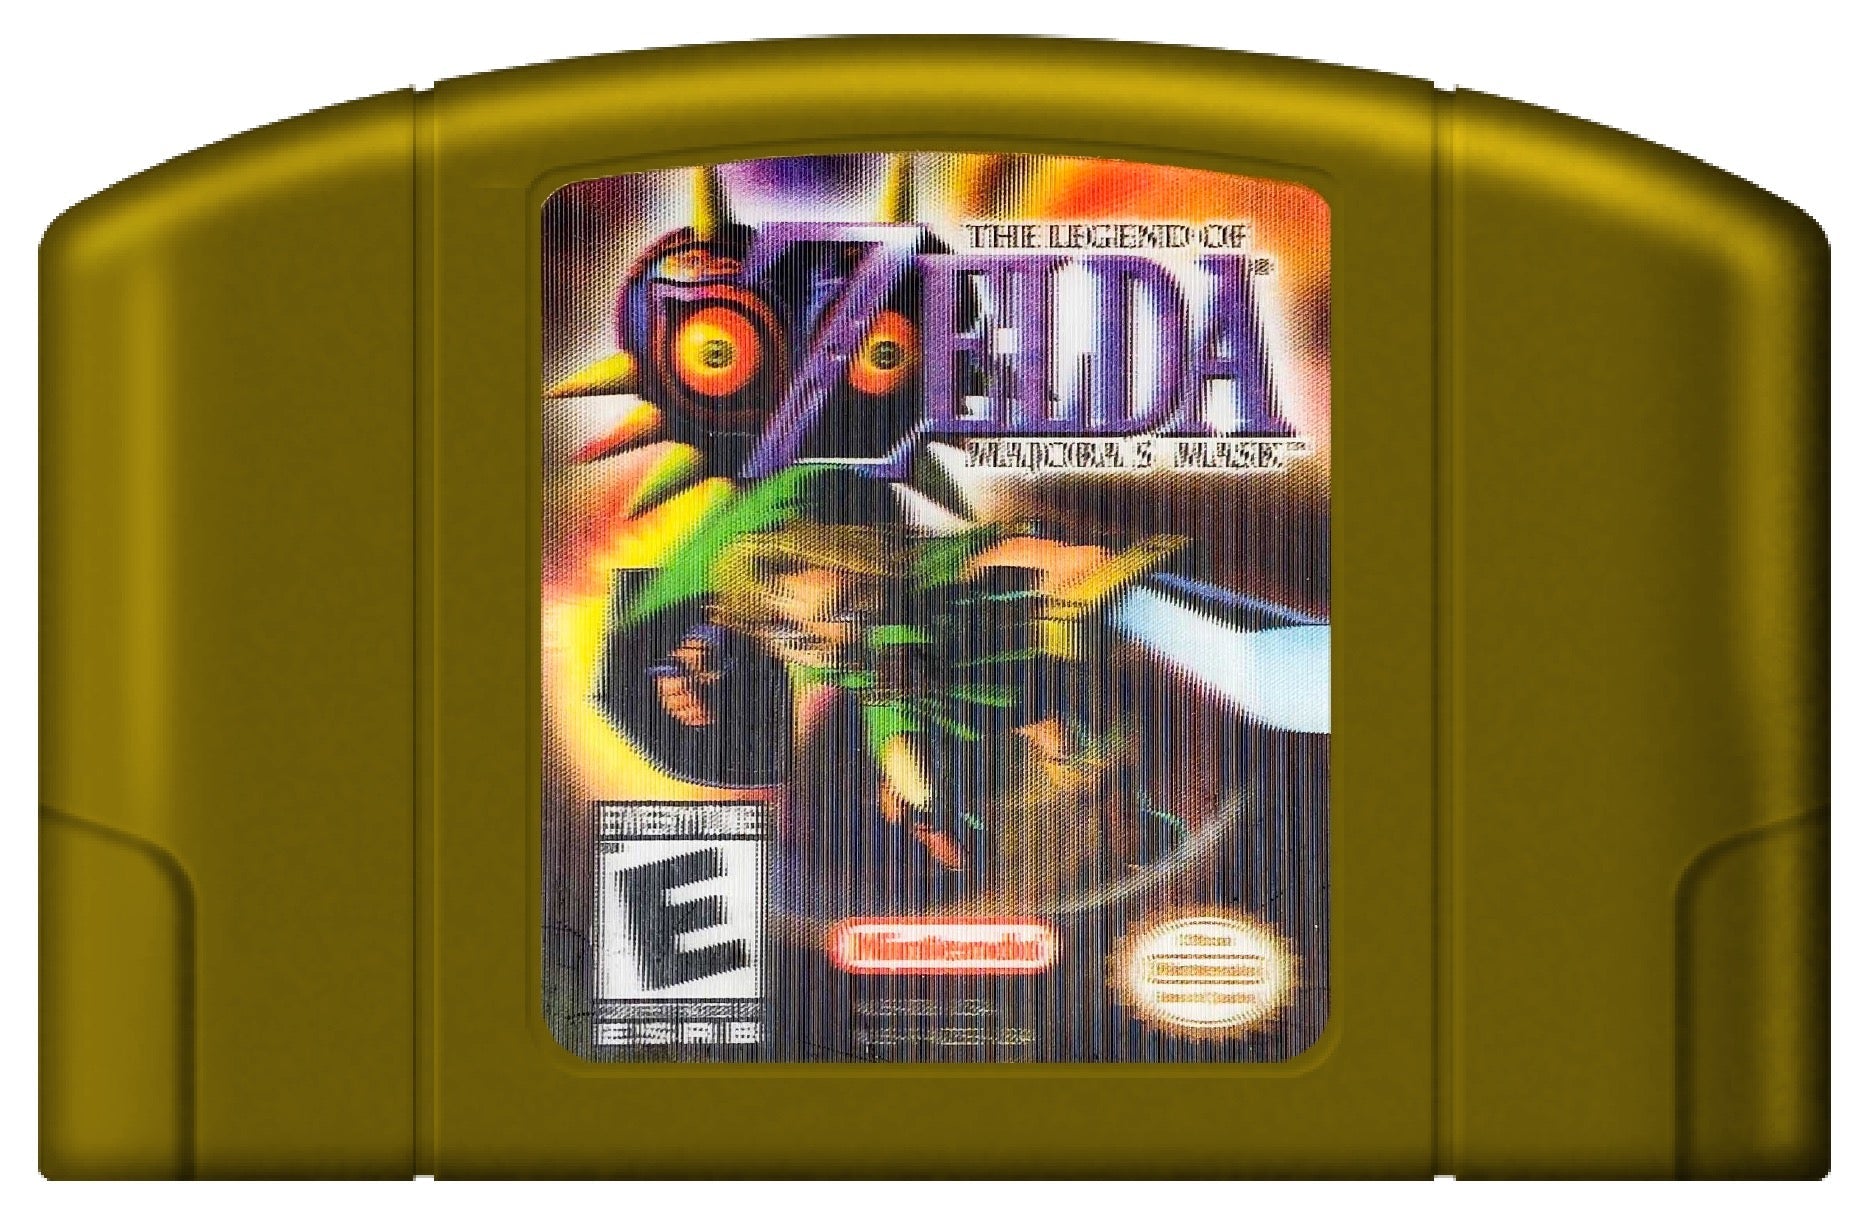 The Legend of Zelda Majora's Mask Collector's Edition (Holo) Cover Art and Product Photo